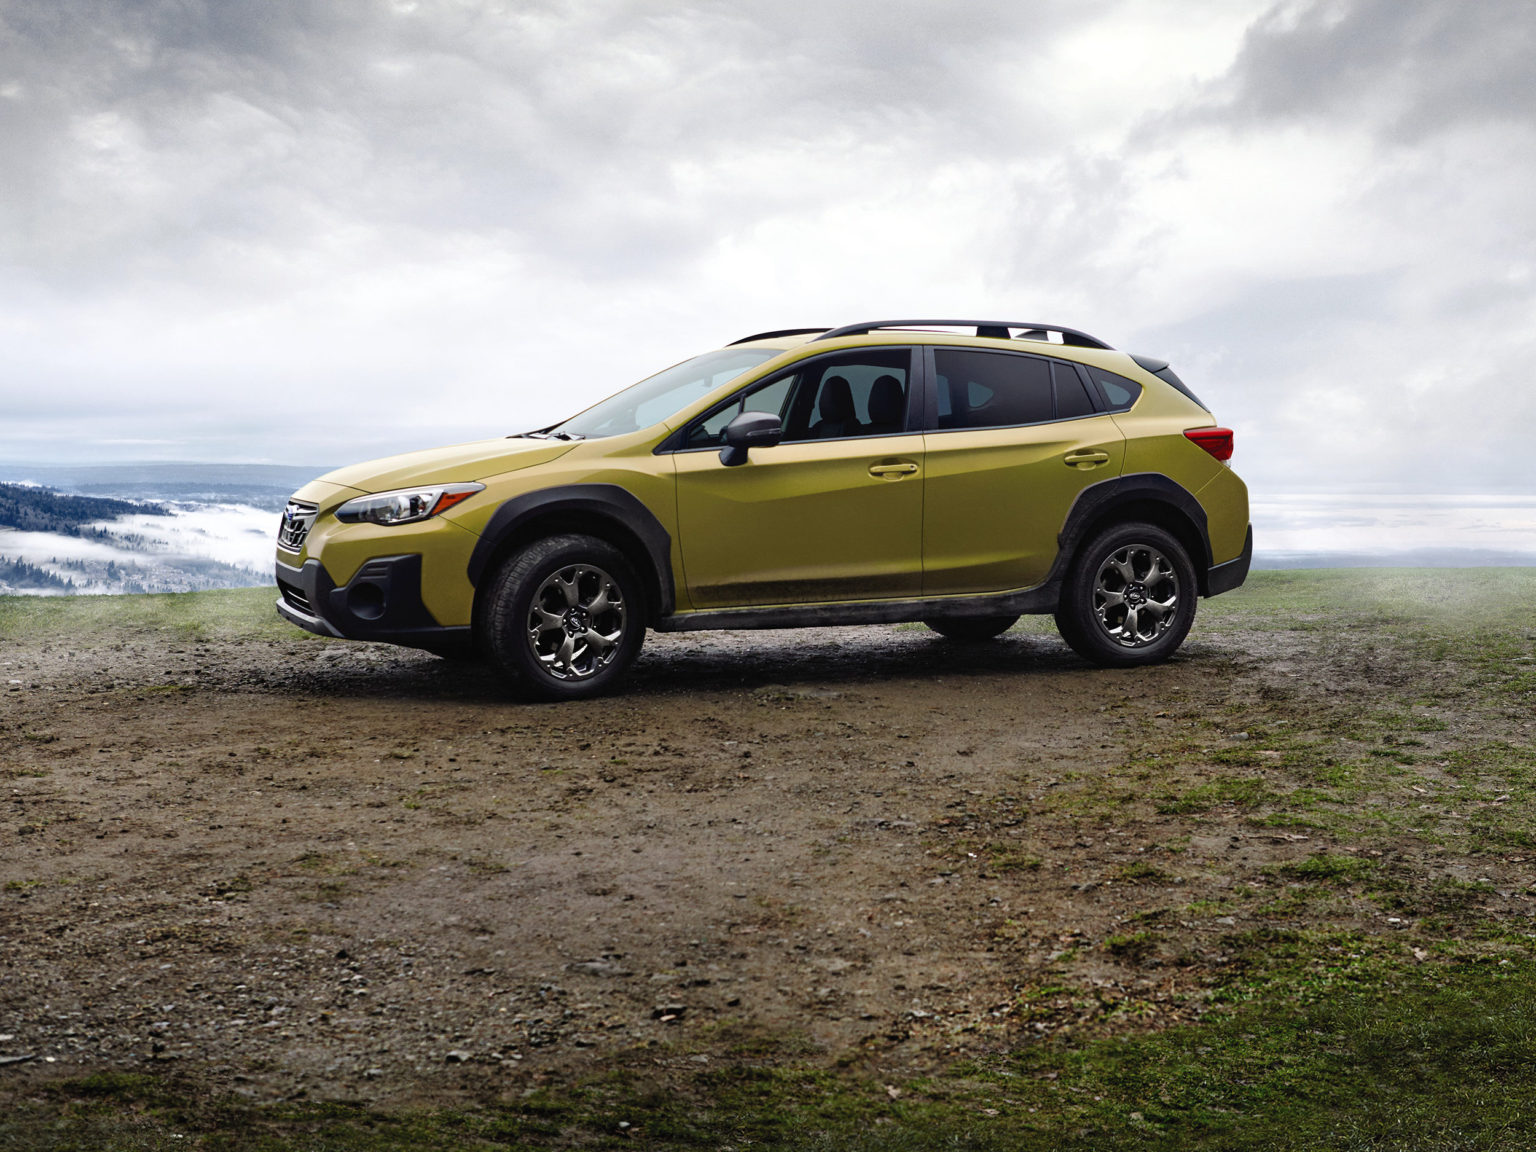 The Subaru Crosstrek has been refreshed for the 2021 model year.